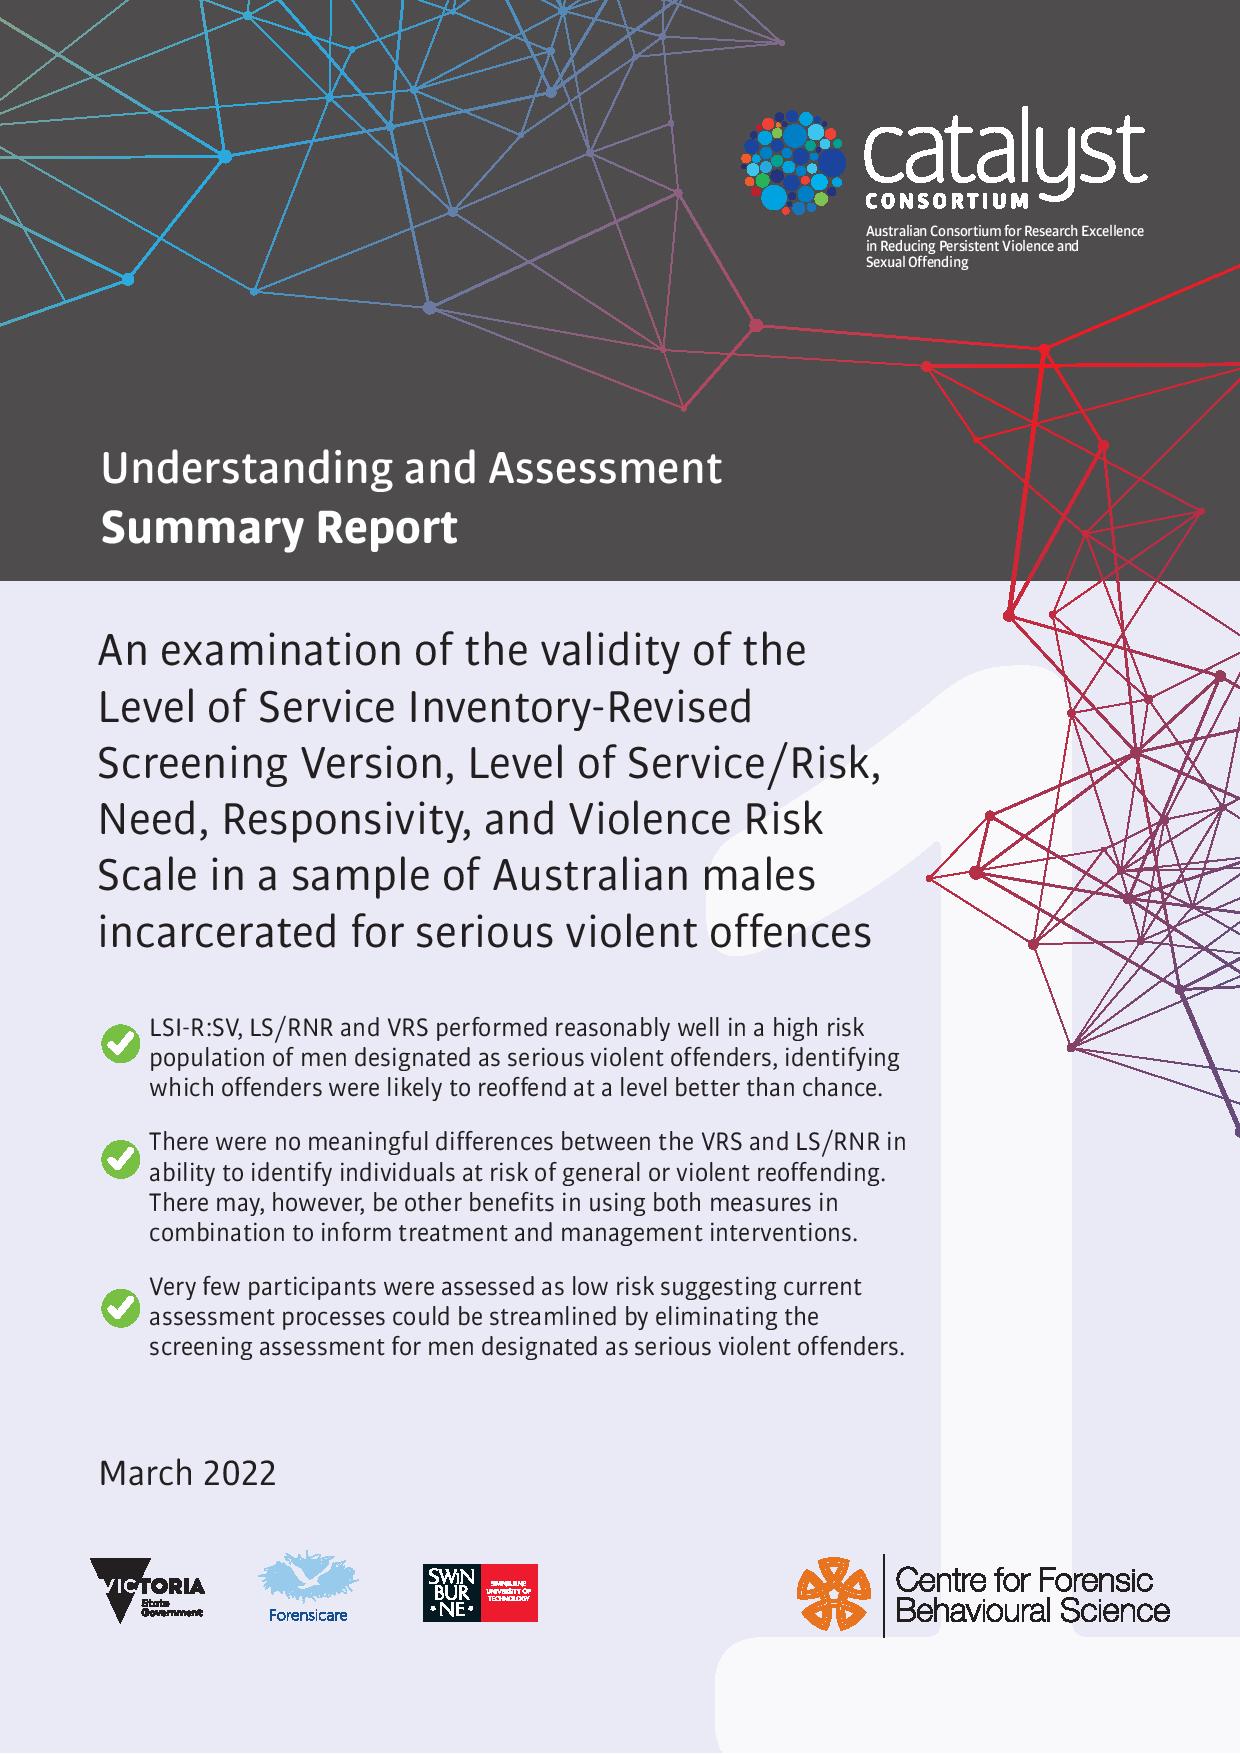 An examination of the validity of the Level of Service Inventory-Revised Screening Version, Level of Service / Risk, Need, Responsivity, and Violence Risk Scale in a sample of Australian males incarcerated for serious violent offences